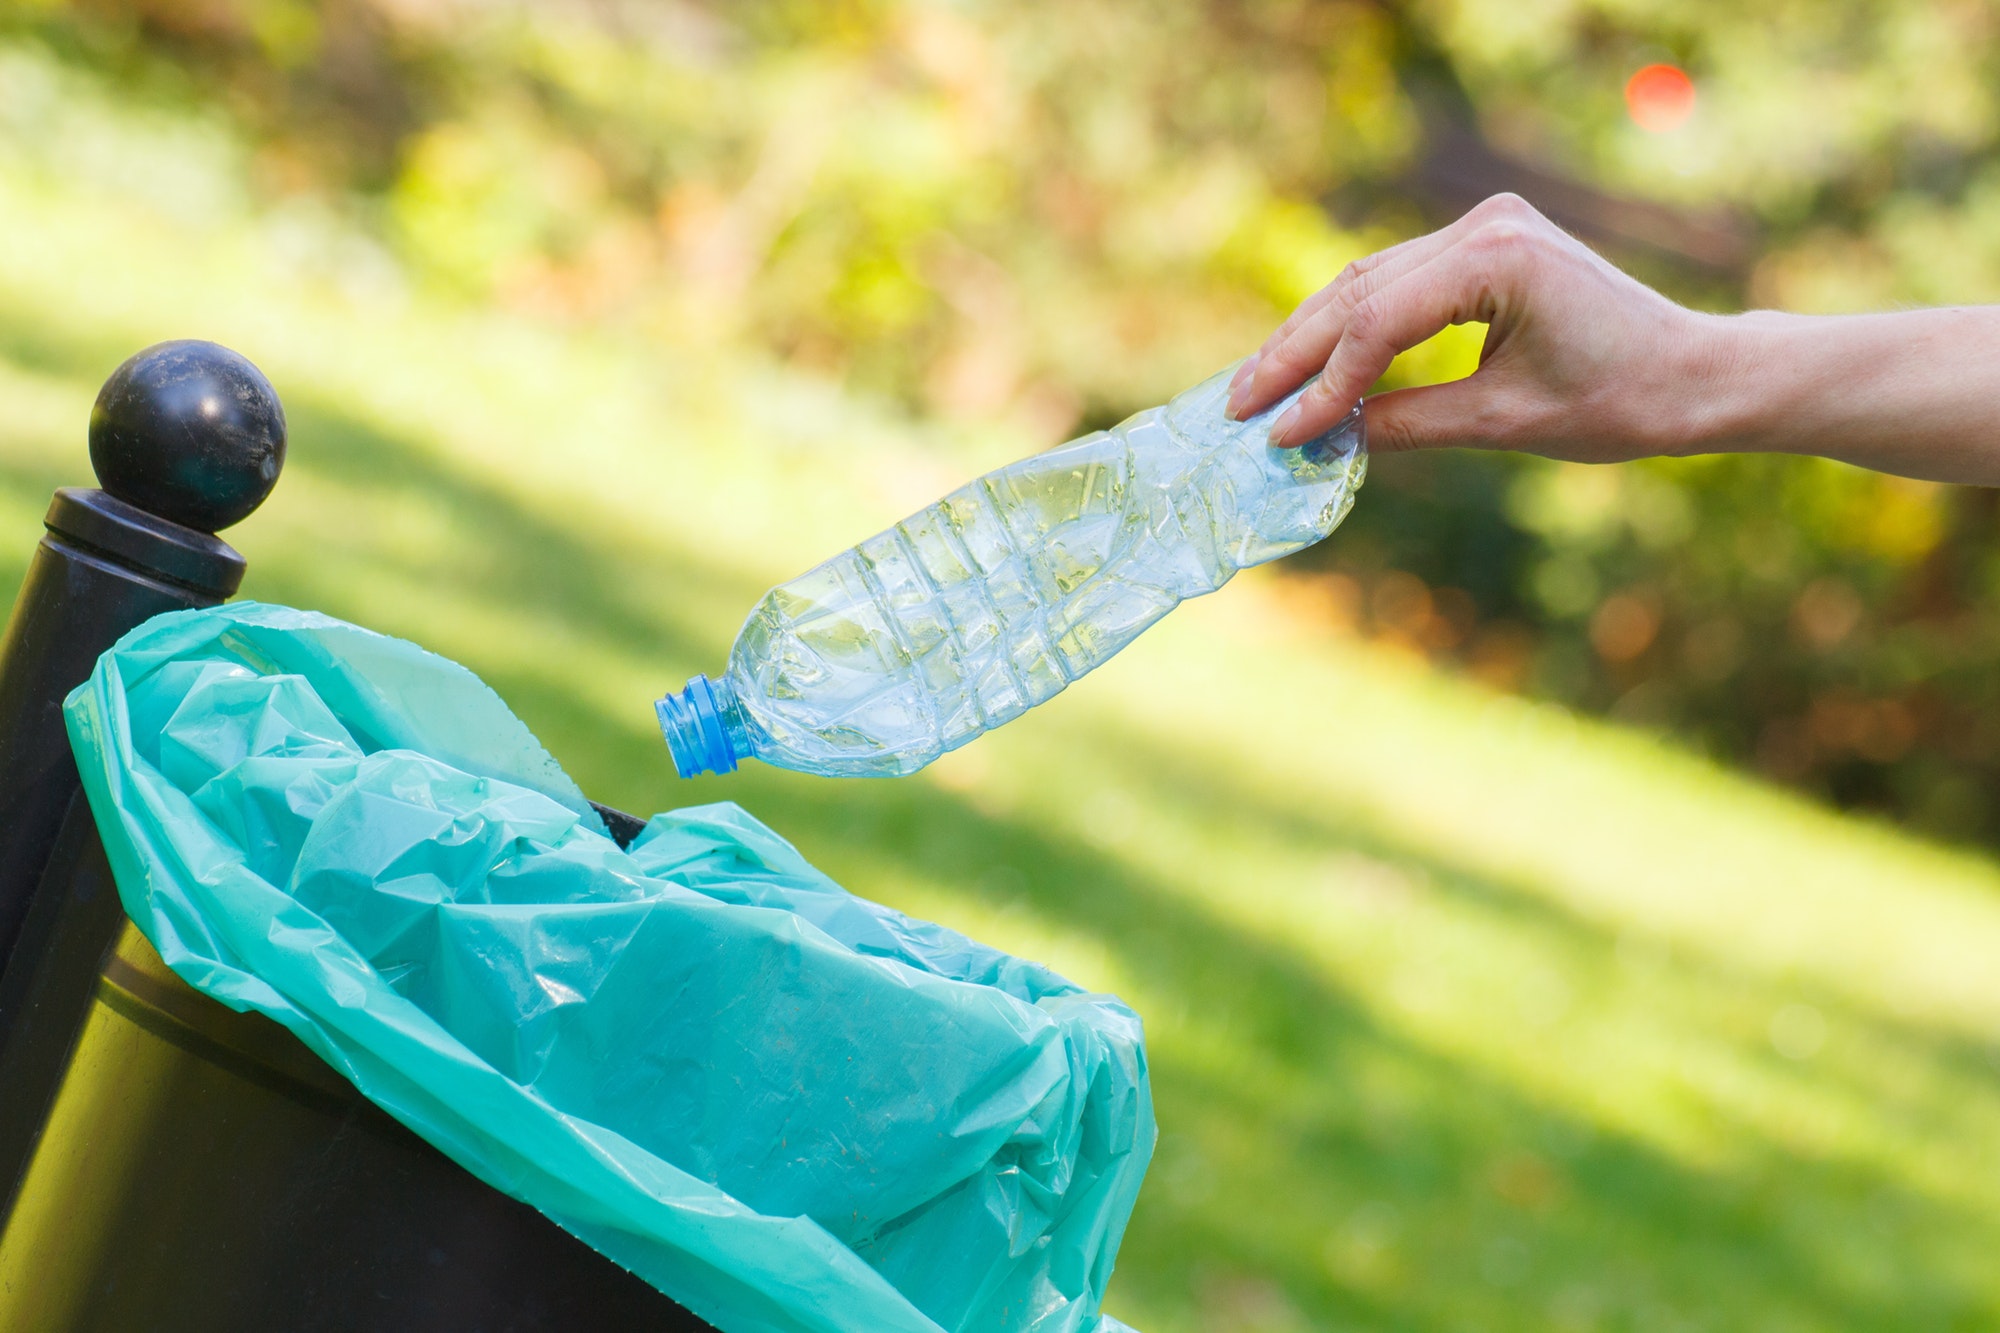 Hand of woman throwing bottle into recycling bin, littering of environmental